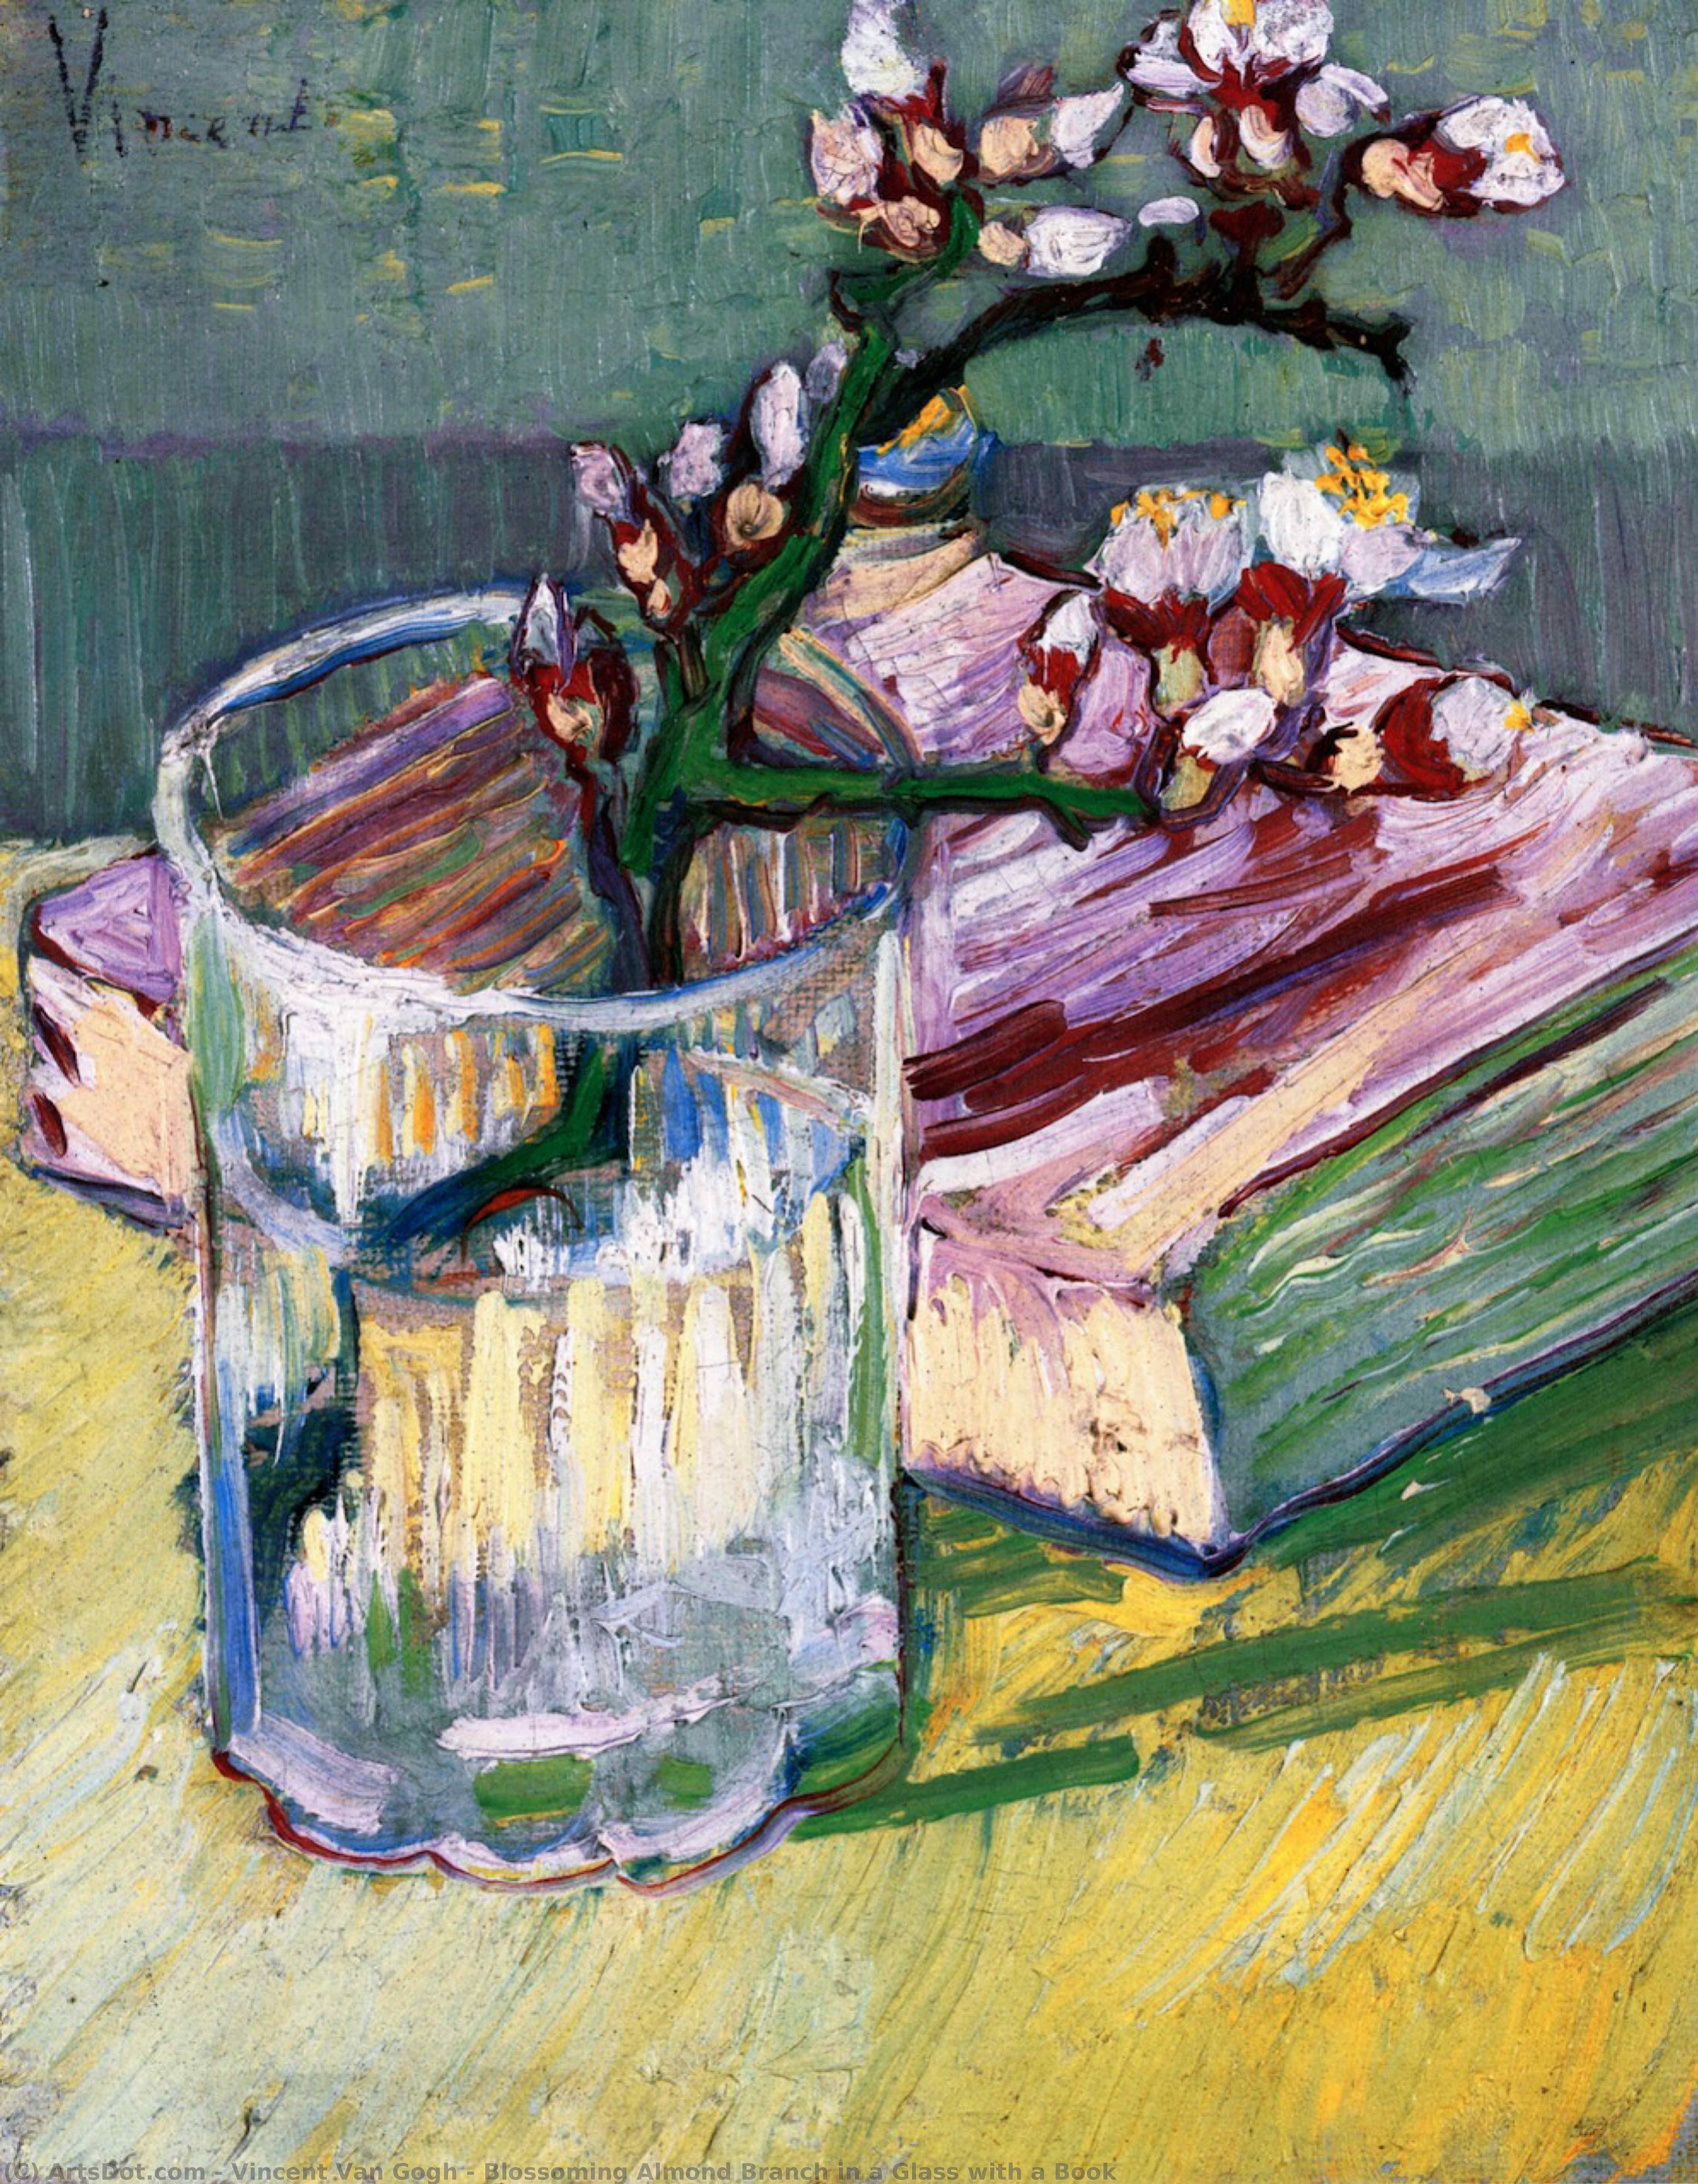 WikiOO.org - Güzel Sanatlar Ansiklopedisi - Resim, Resimler Vincent Van Gogh - Blossoming Almond Branch in a Glass with a Book